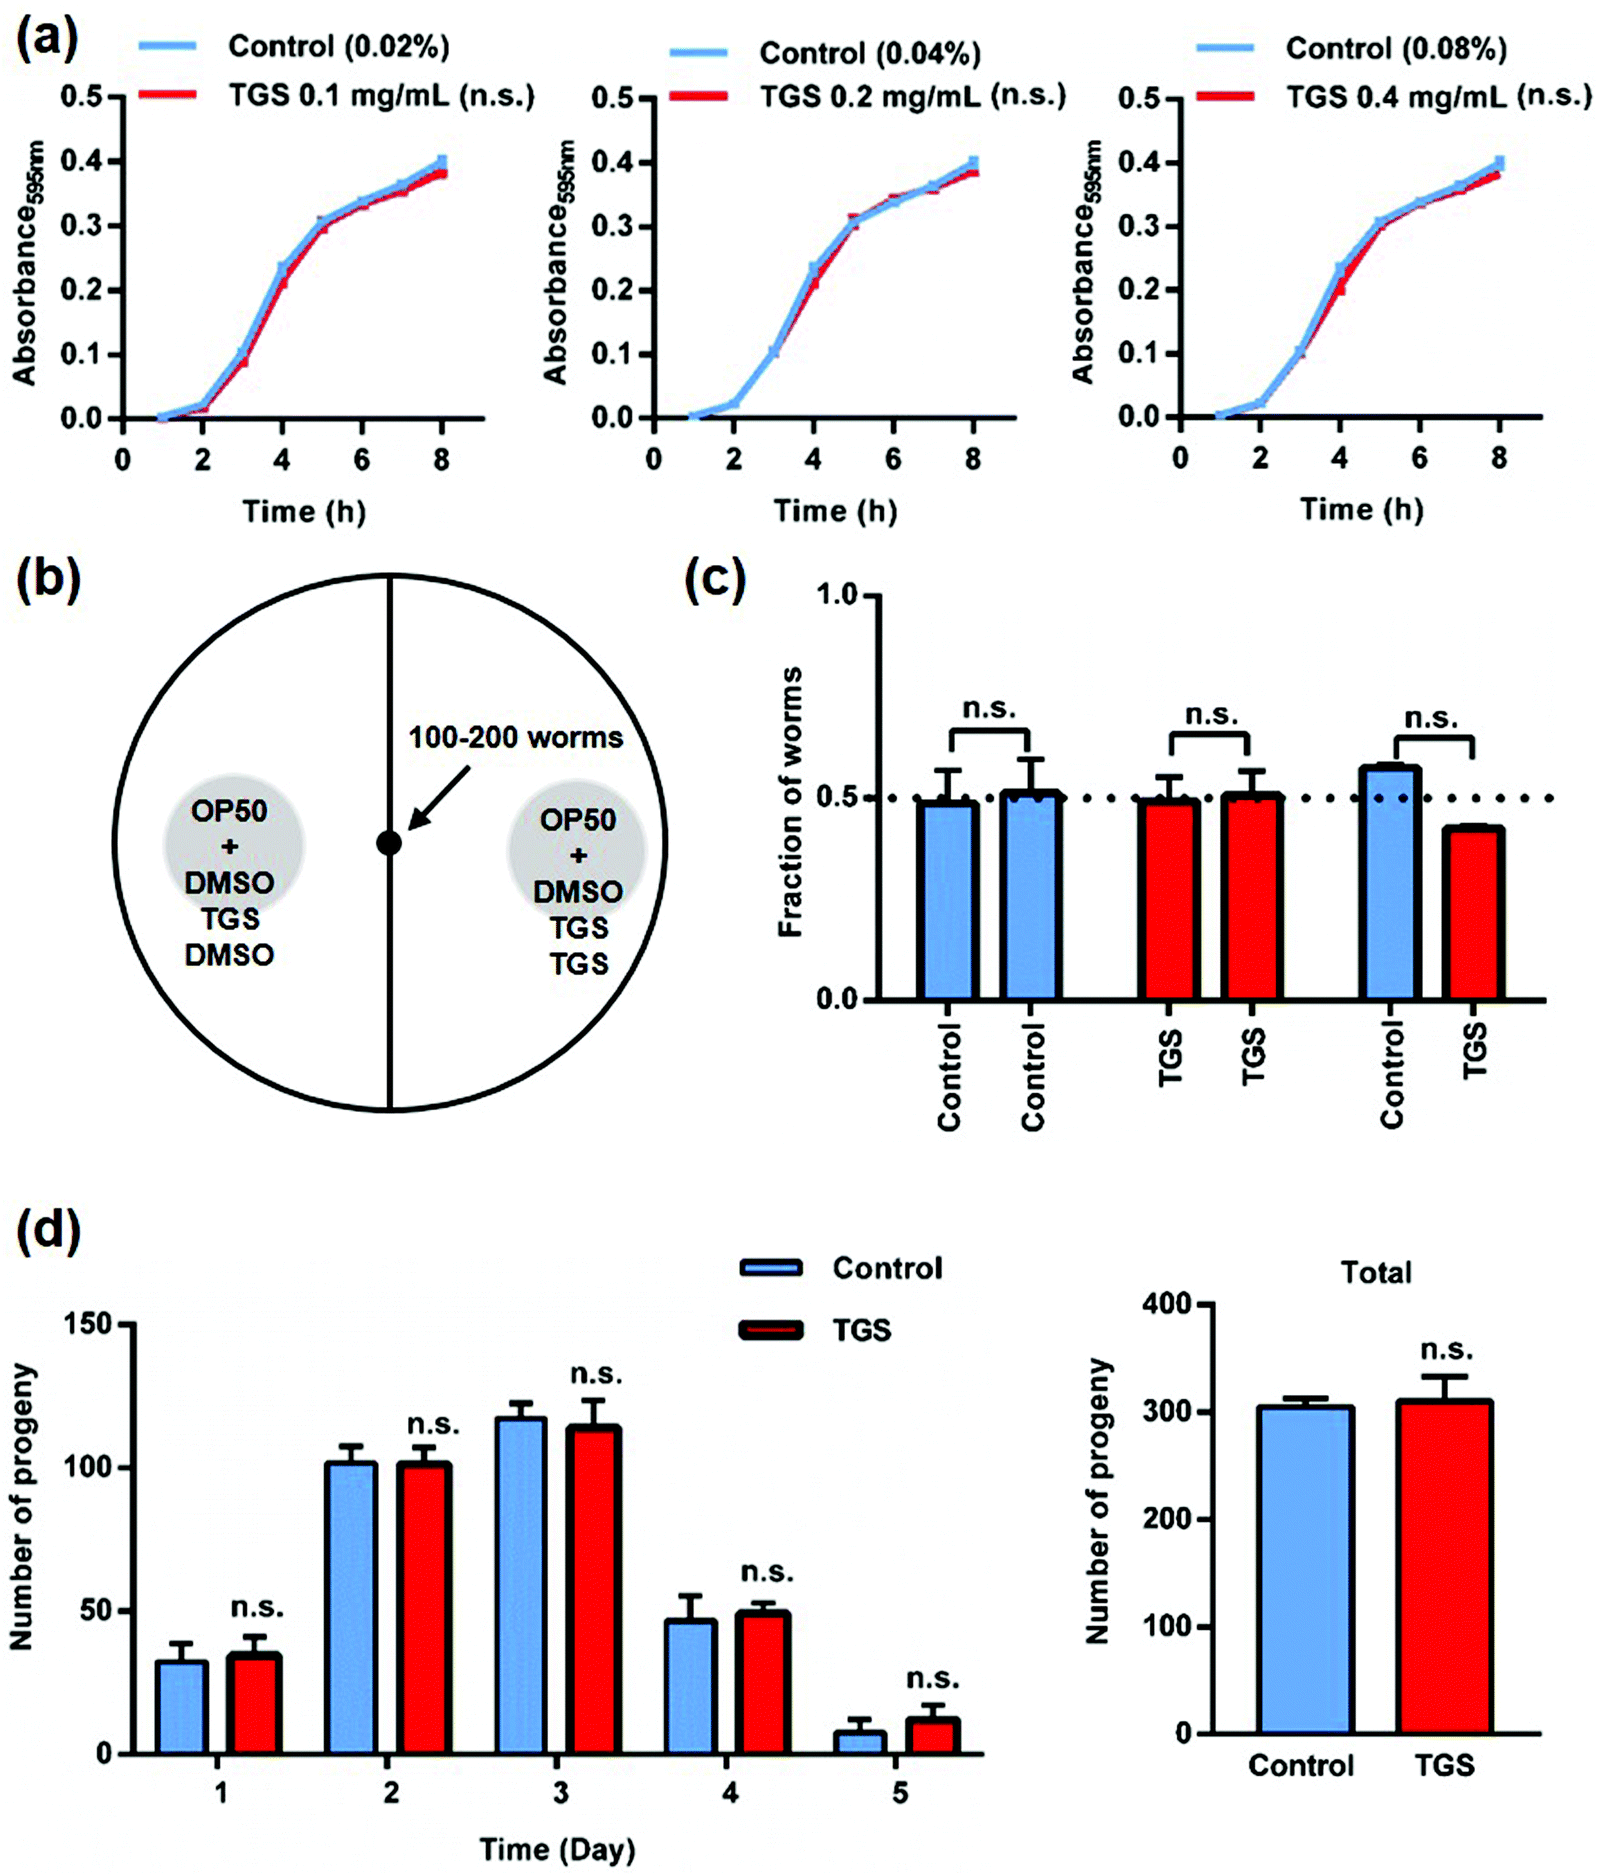 Ginsenoside Extract From Ginseng Extends Lifespan And Health Span In Caenorhabditis Elegans Food Function Rsc Publishing Doi101039 D1fo00576f